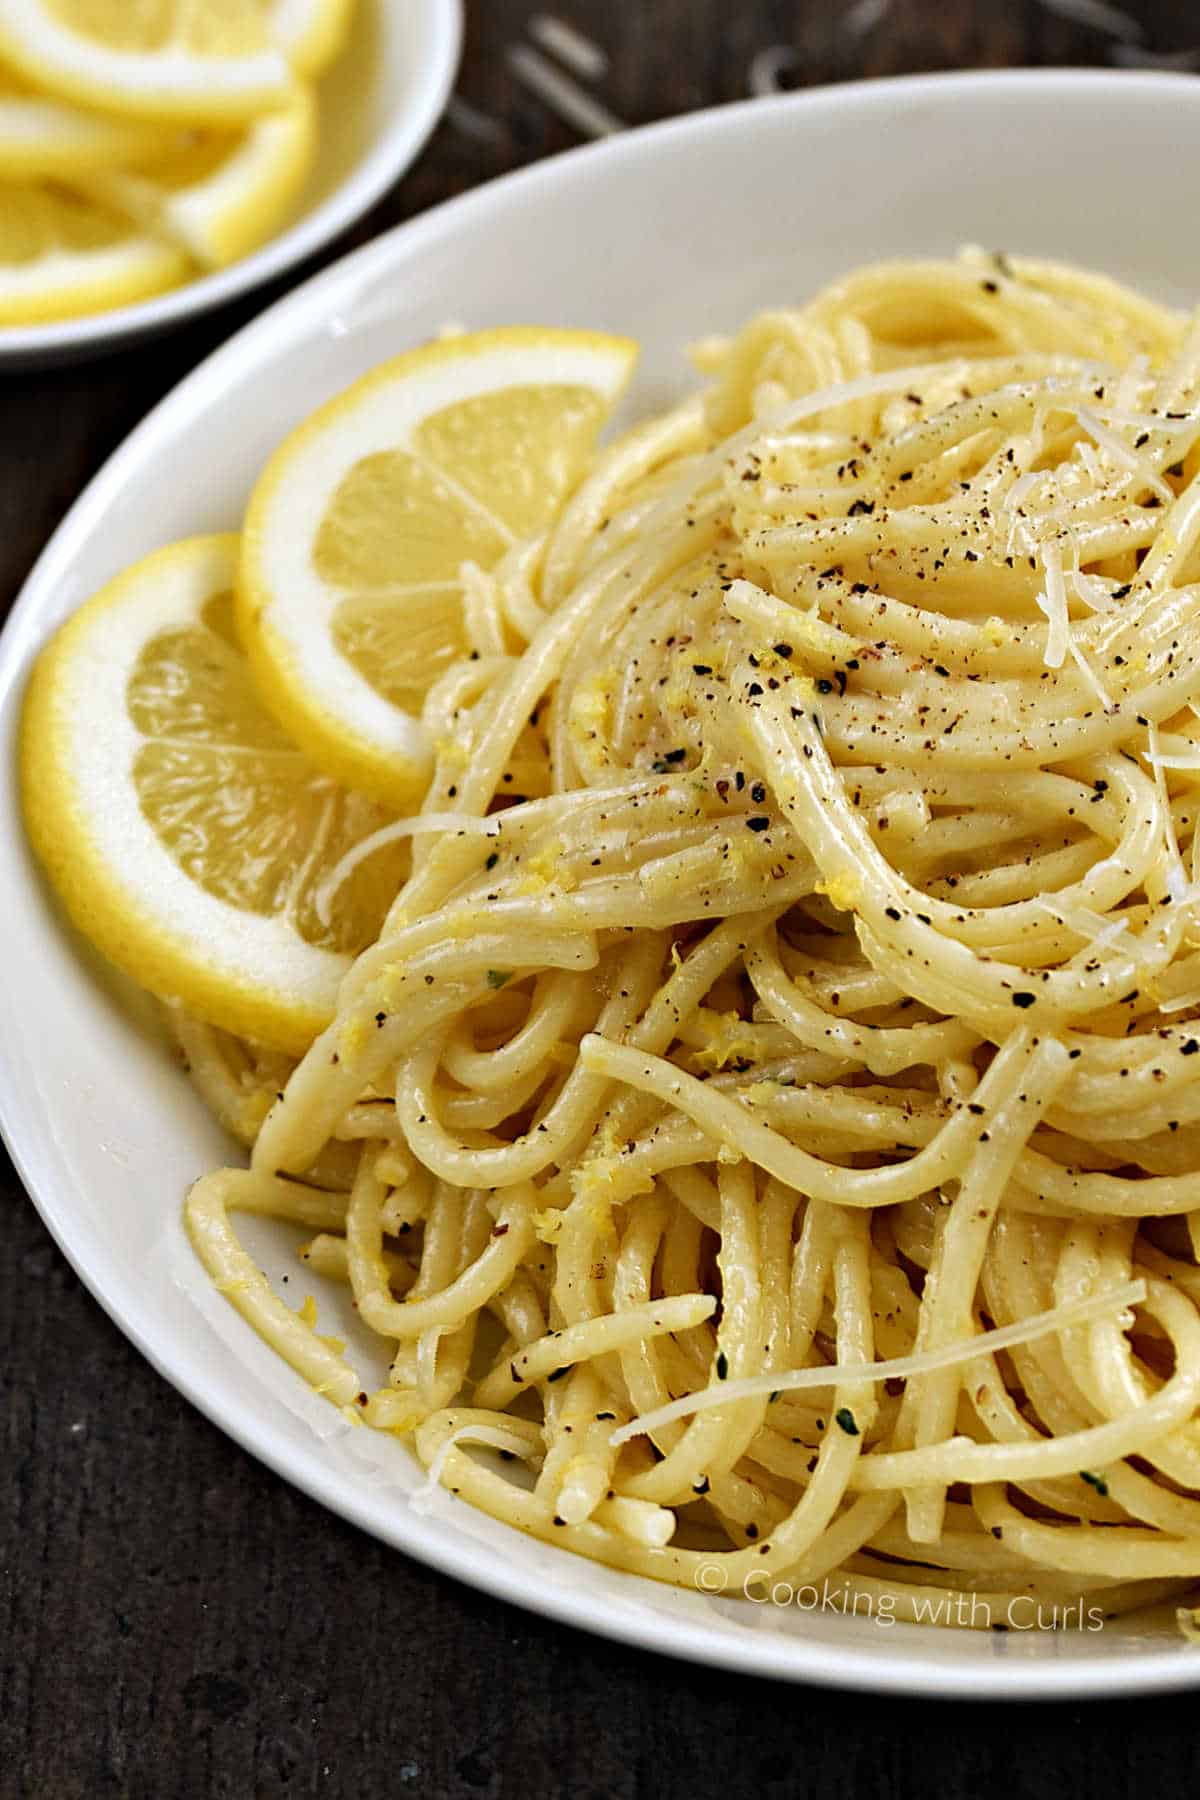 Spaghetti with lemon sauce in a bowl with lemon slices and sprinkled with black pepper.